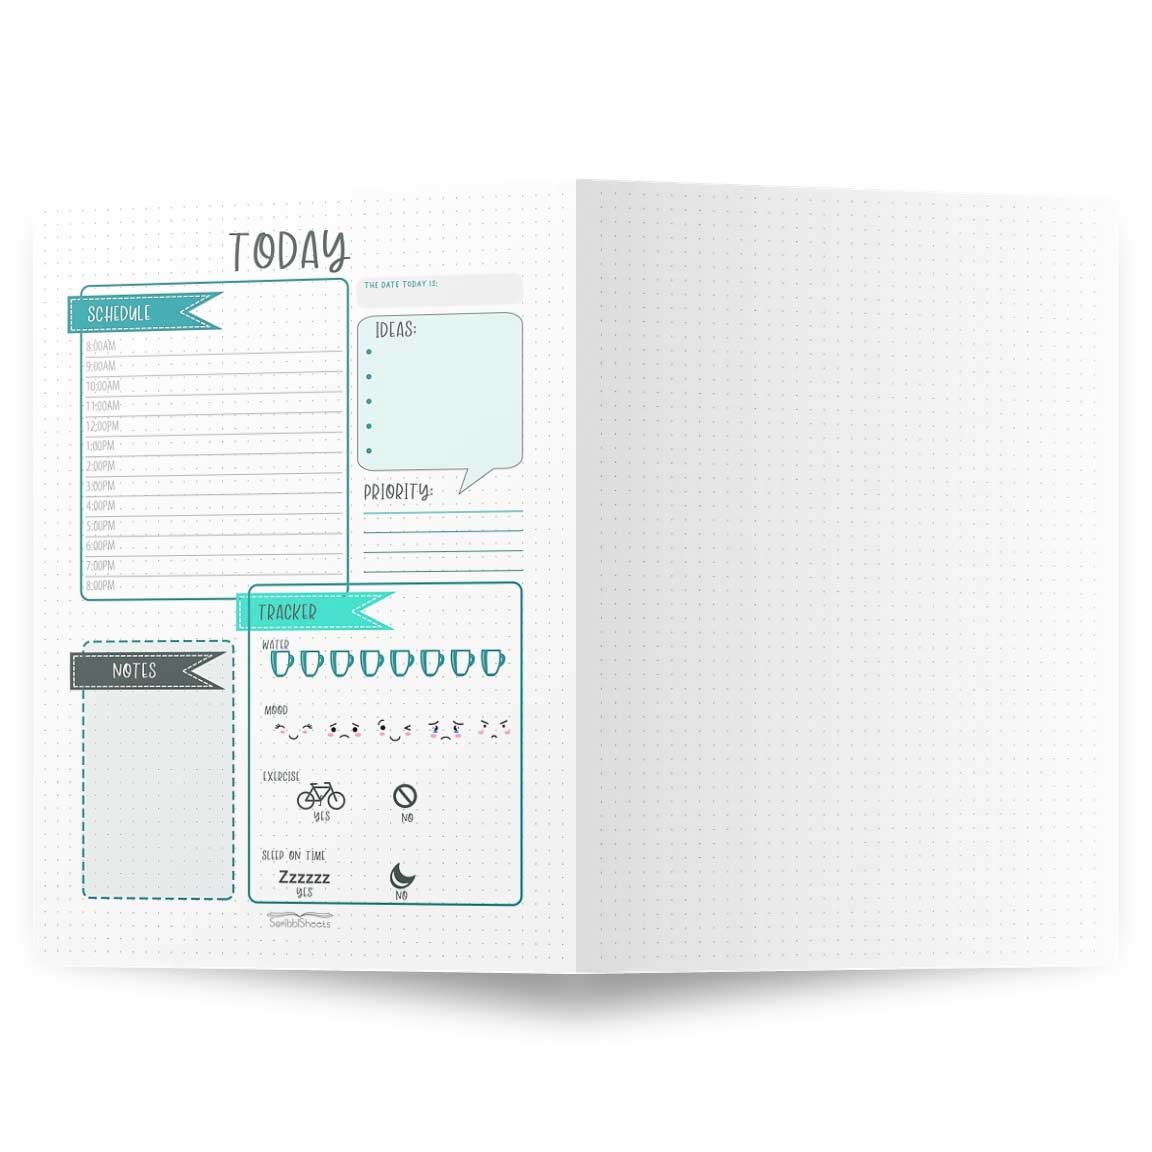 Today's Daily Planner Printable Page